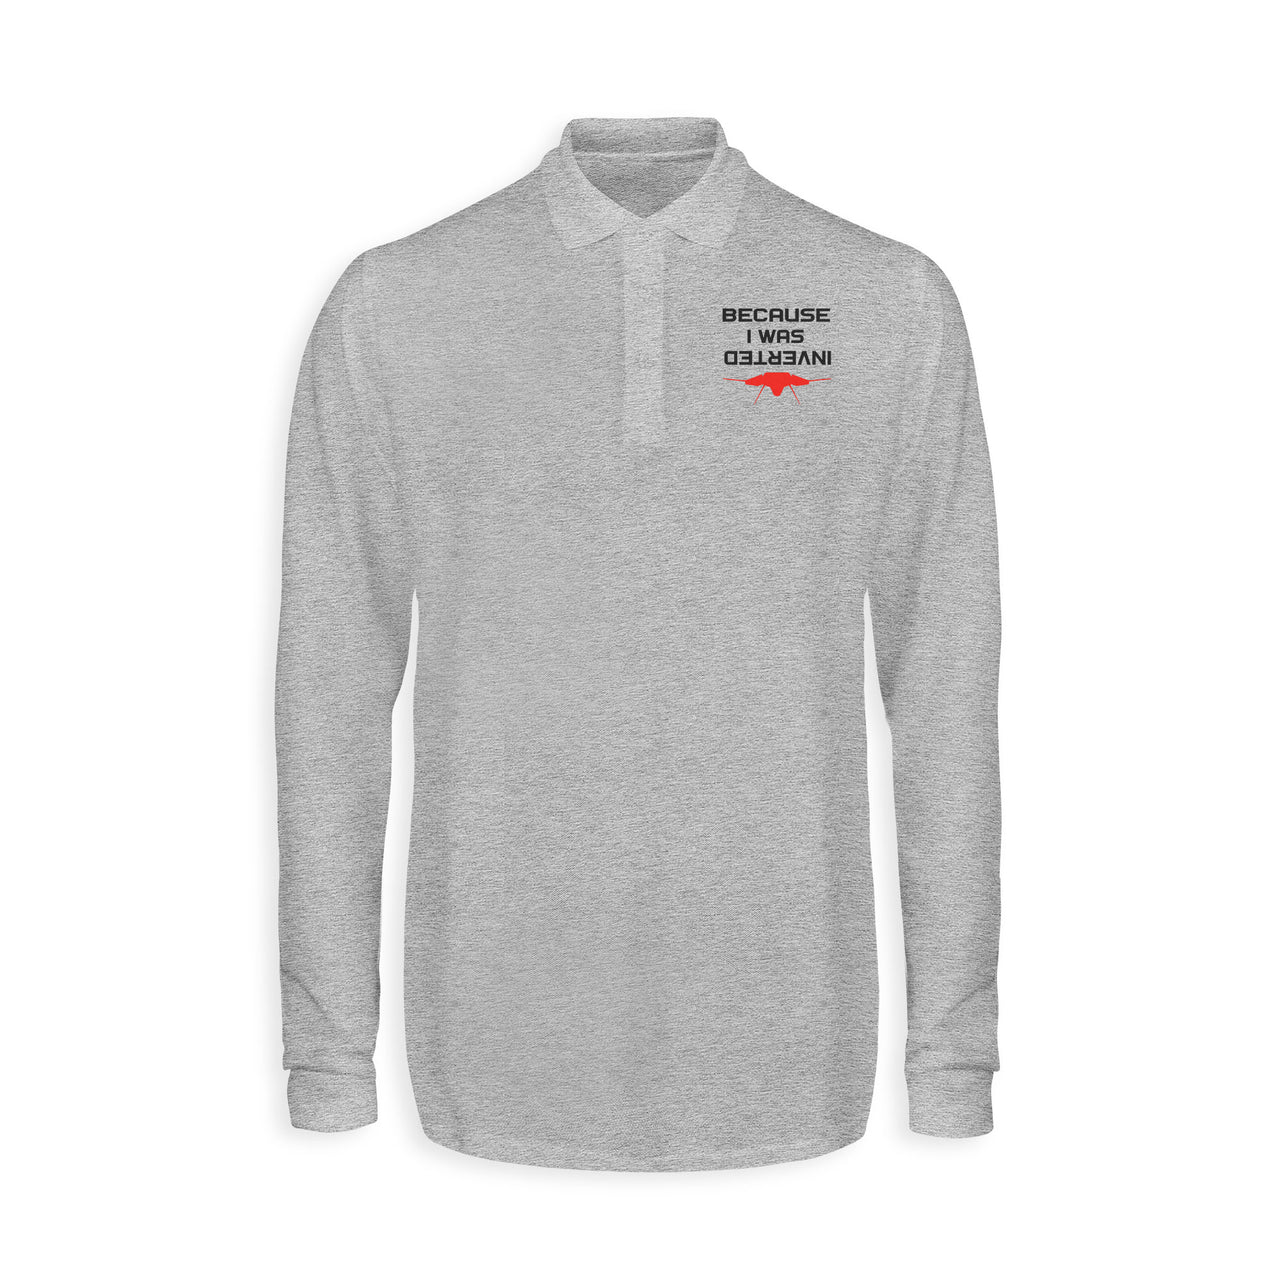 Because I was Inverted Designed Long Sleeve Polo T-Shirts